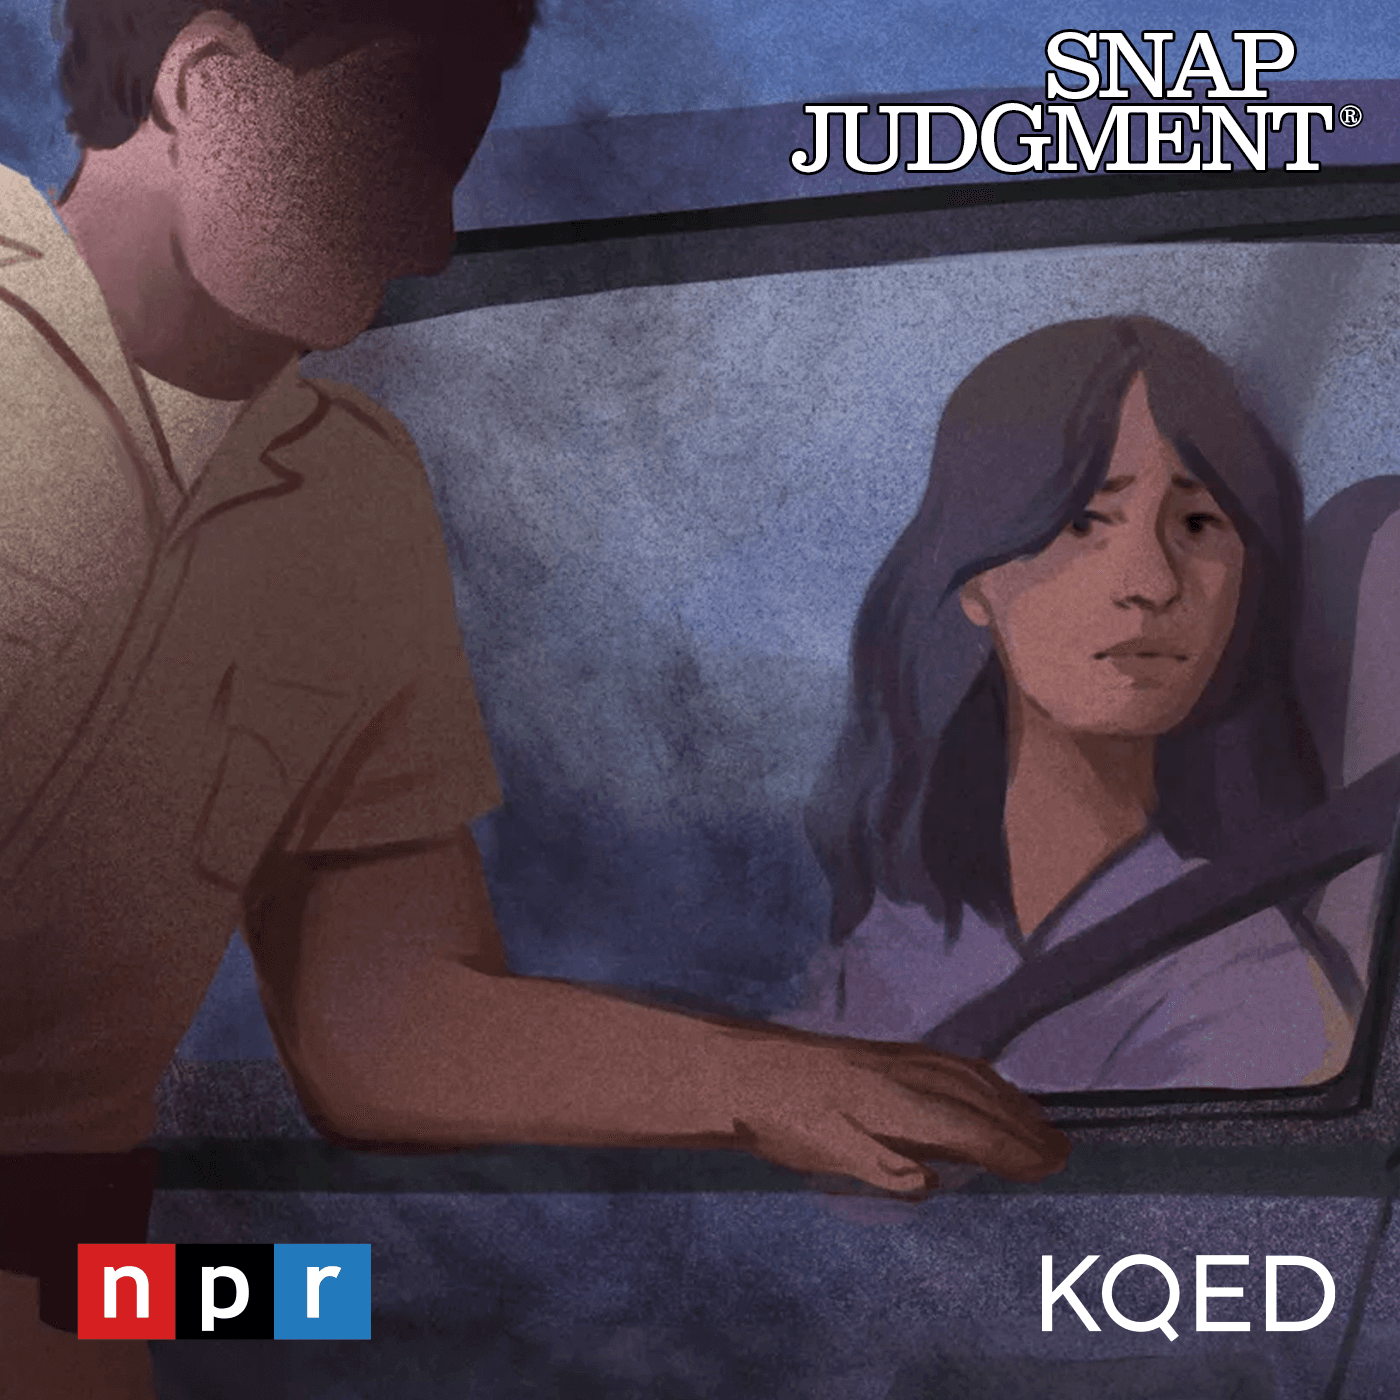 Thumbnail for "On Our Watch from NPR & KQED".